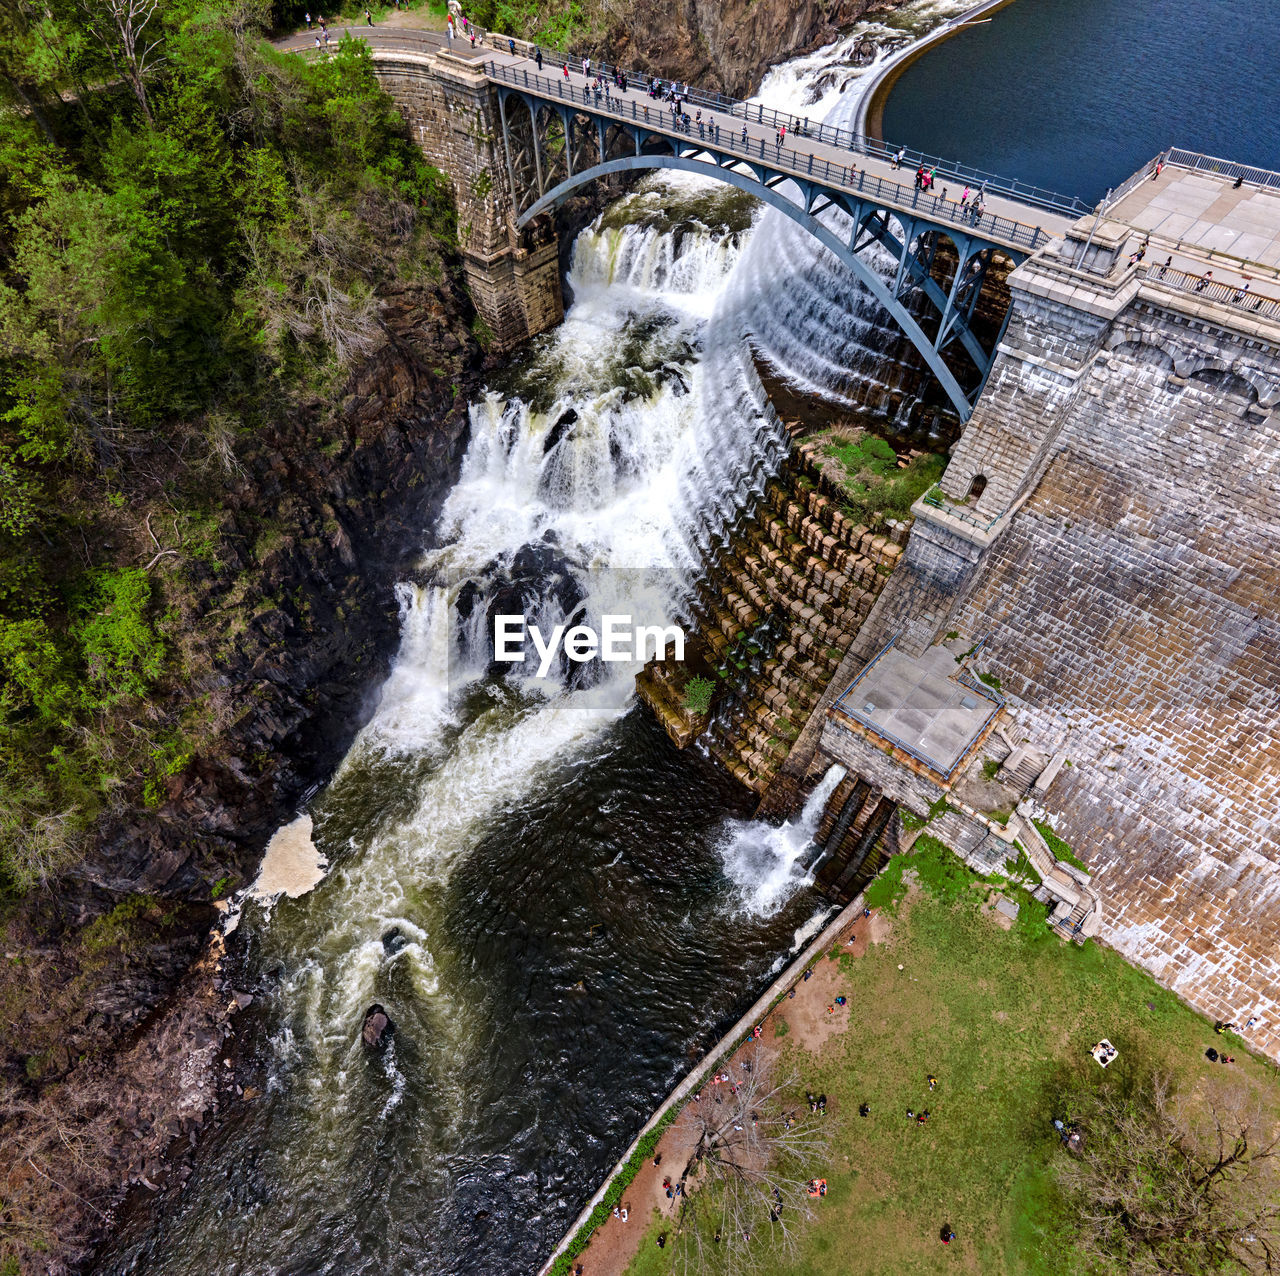 The croton gorge water falls in westchester county, new york